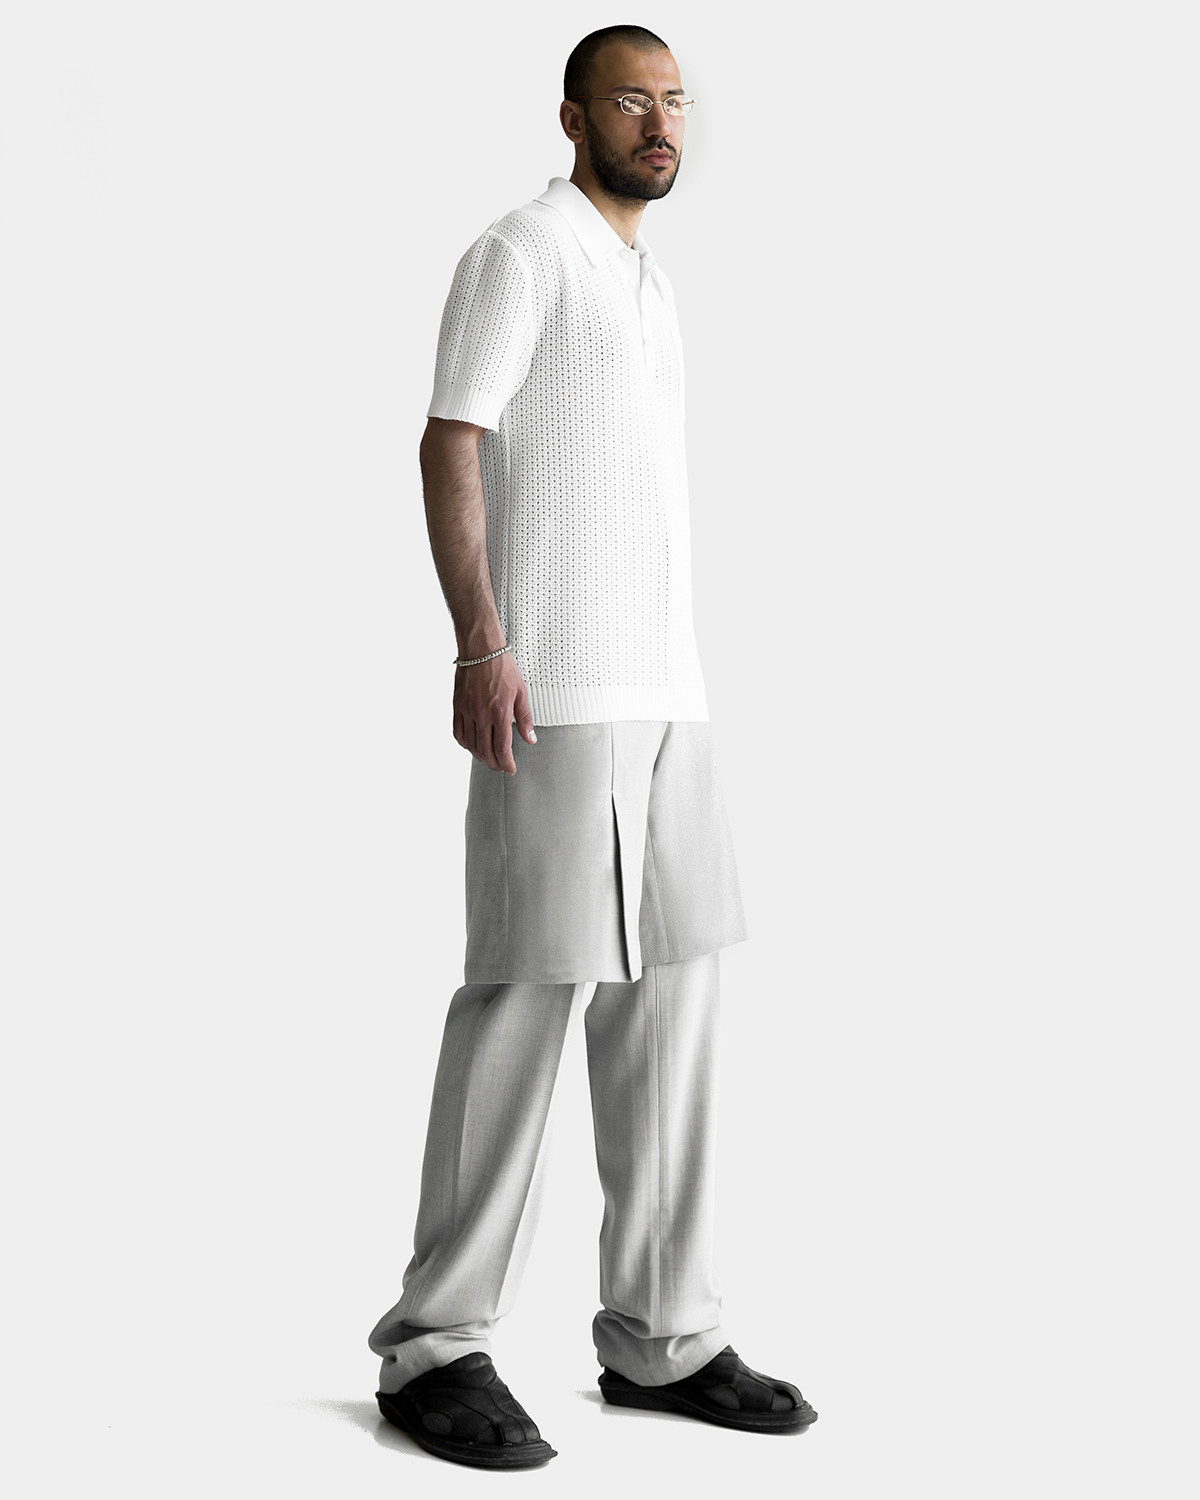 Vagan is wearing a white knitted BROTHER polo-shirt and grey woolen FRIEND shorts-trousers by Ruslan Nasir